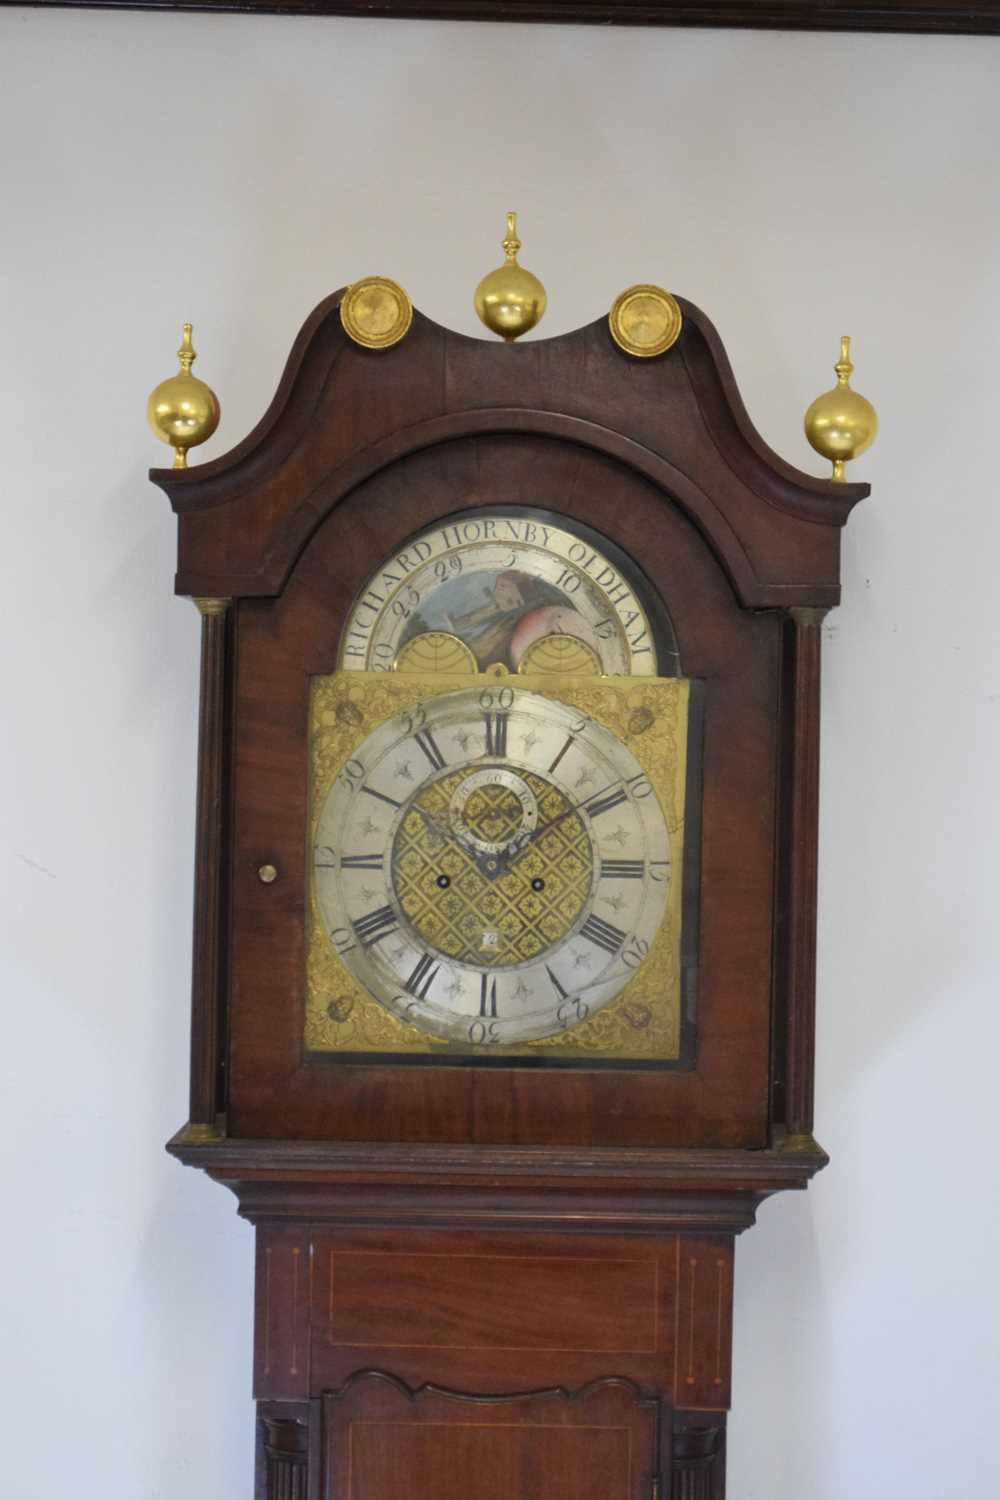 Early 19th Century inlaid mahogany cased 8-day brass dial longcase clock - Richard Hornby, Oldham - Image 11 of 14